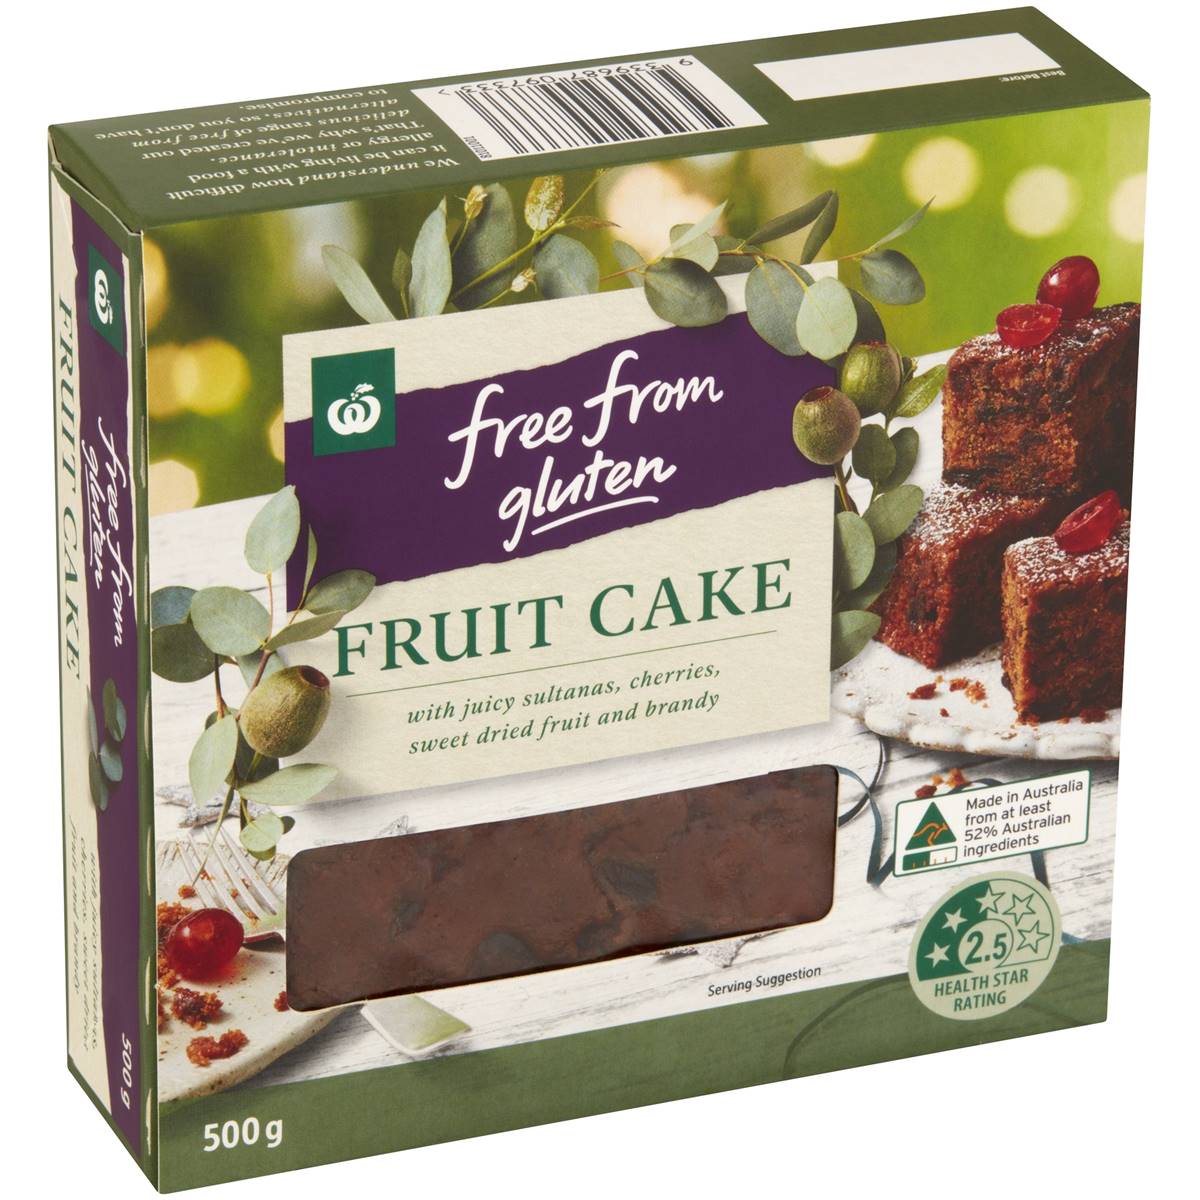 Calories in Woolworths Free From Gluten Fruit Cake